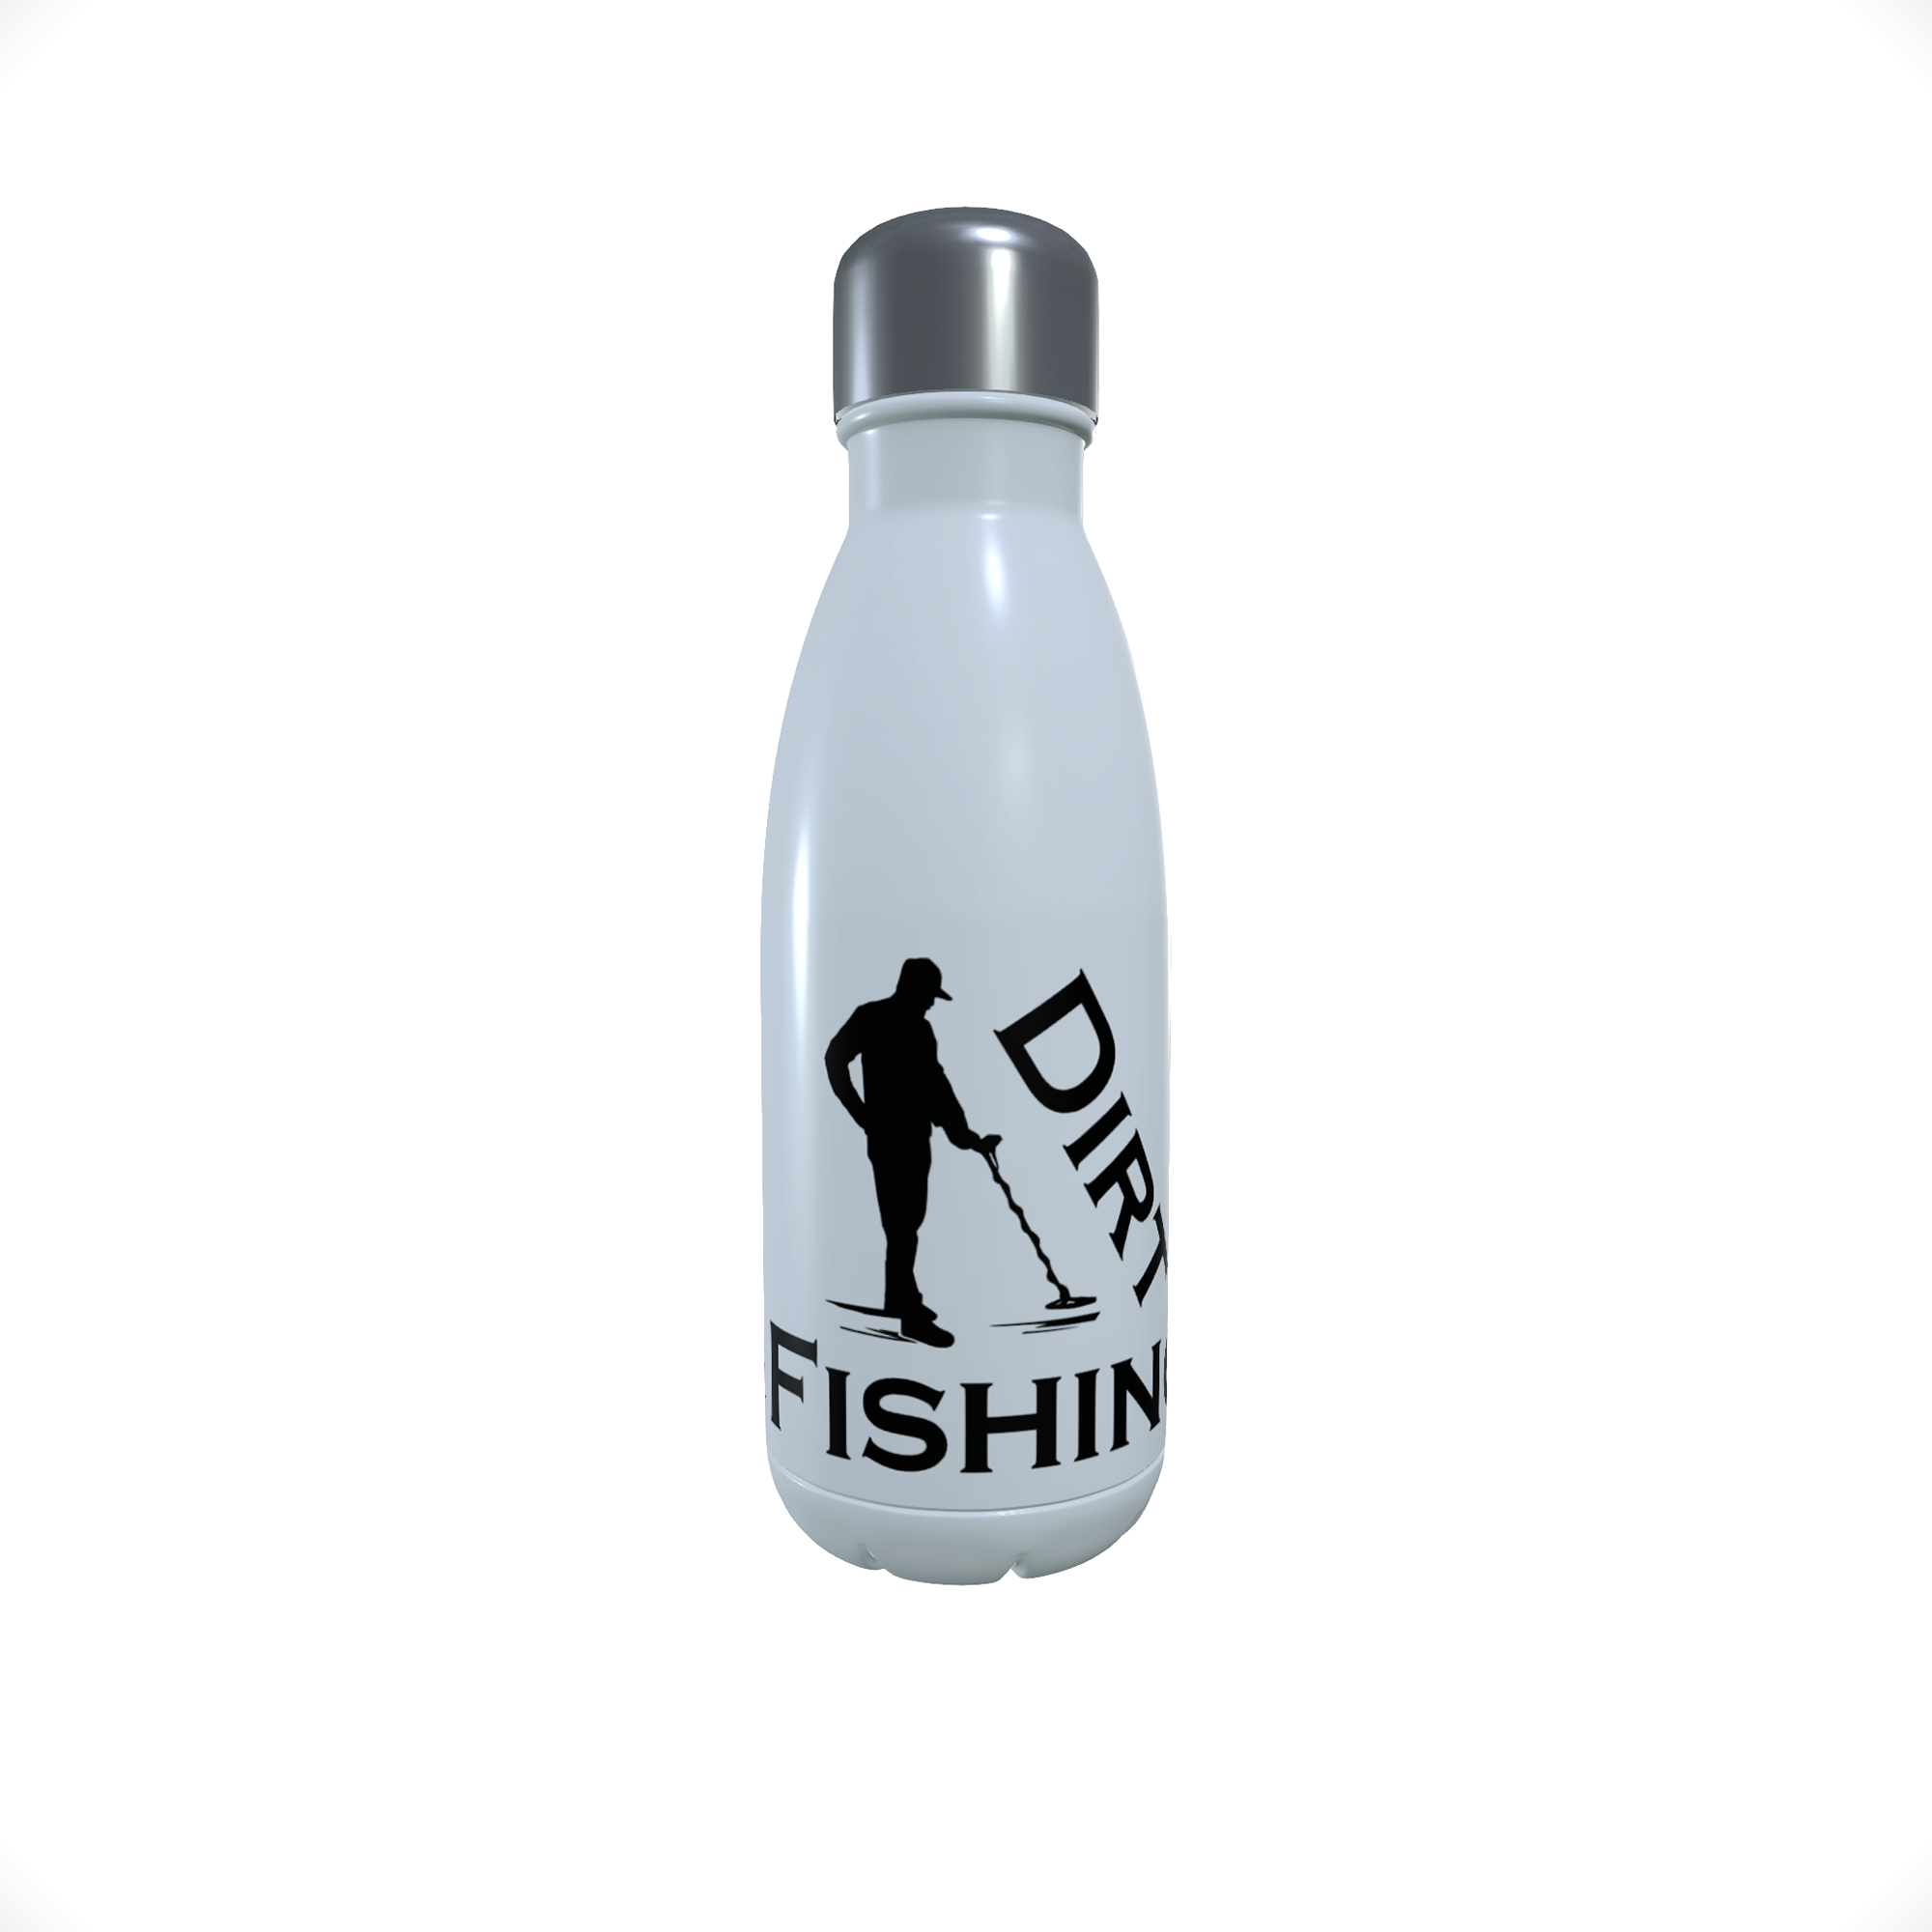 Dirt Fishing Insulated Drinks Bottle, Insulated Water Bottle